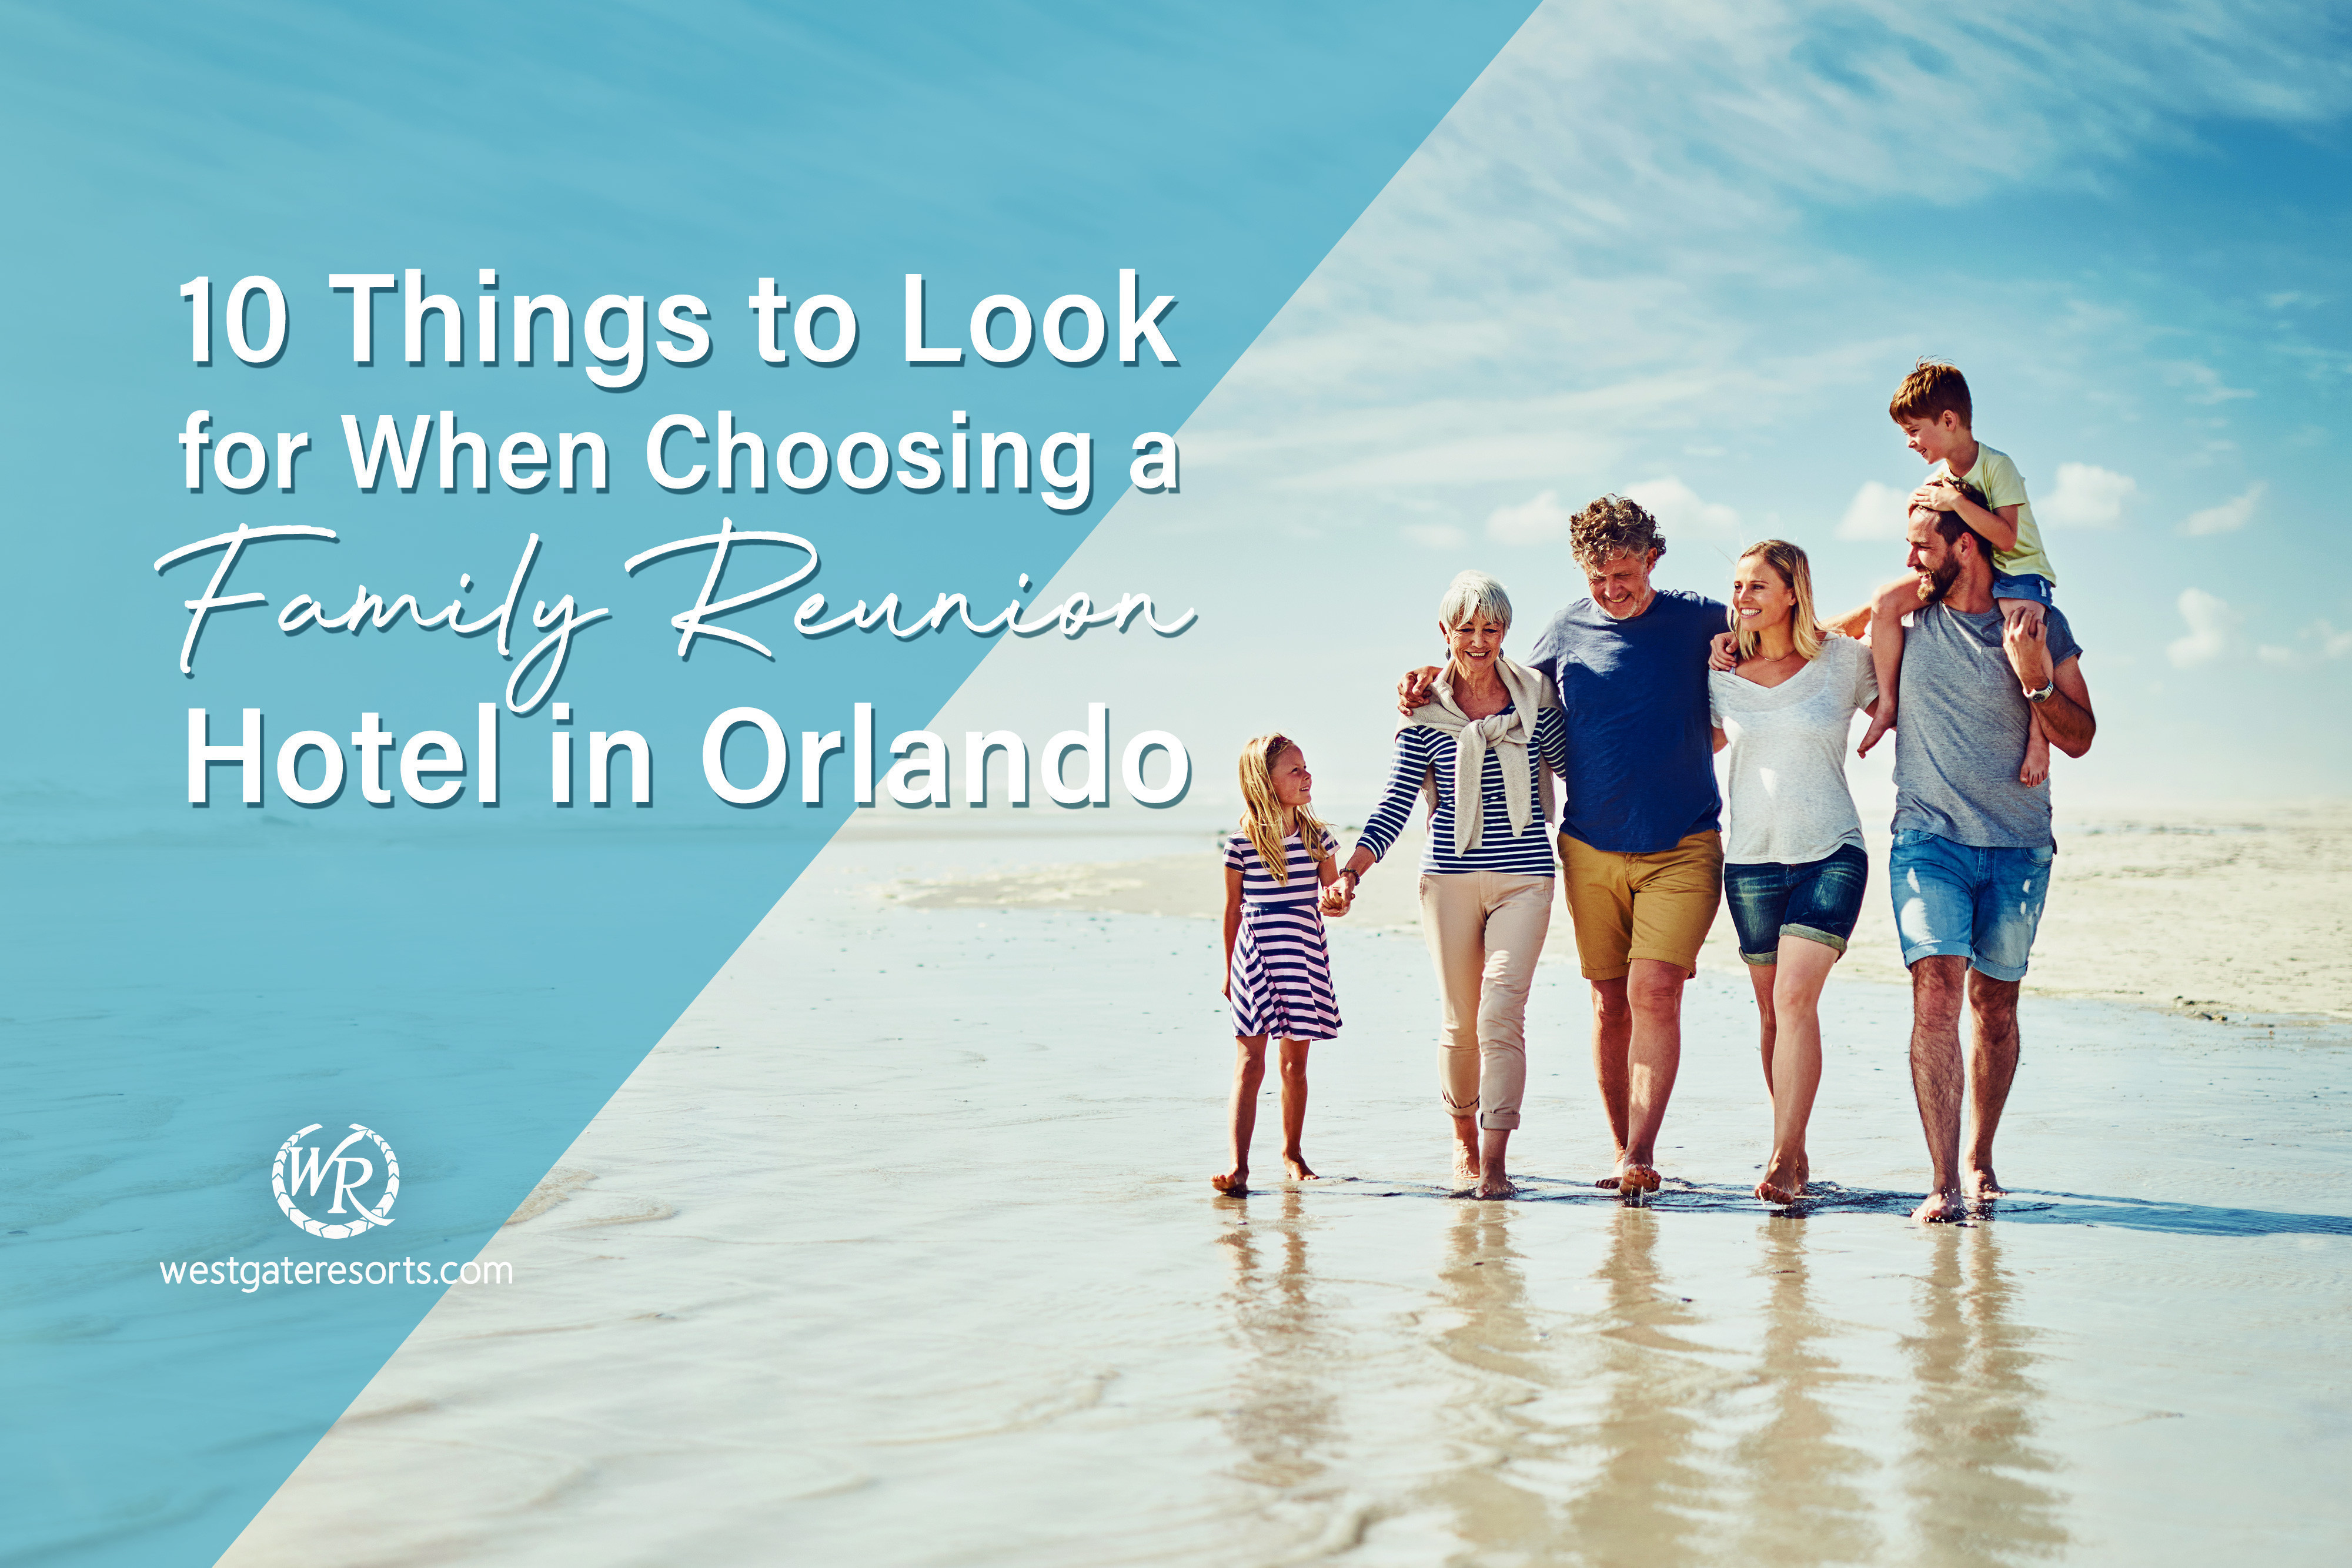 10 Things to Look for When Choosing a Family Reunion Hotel in Orlando